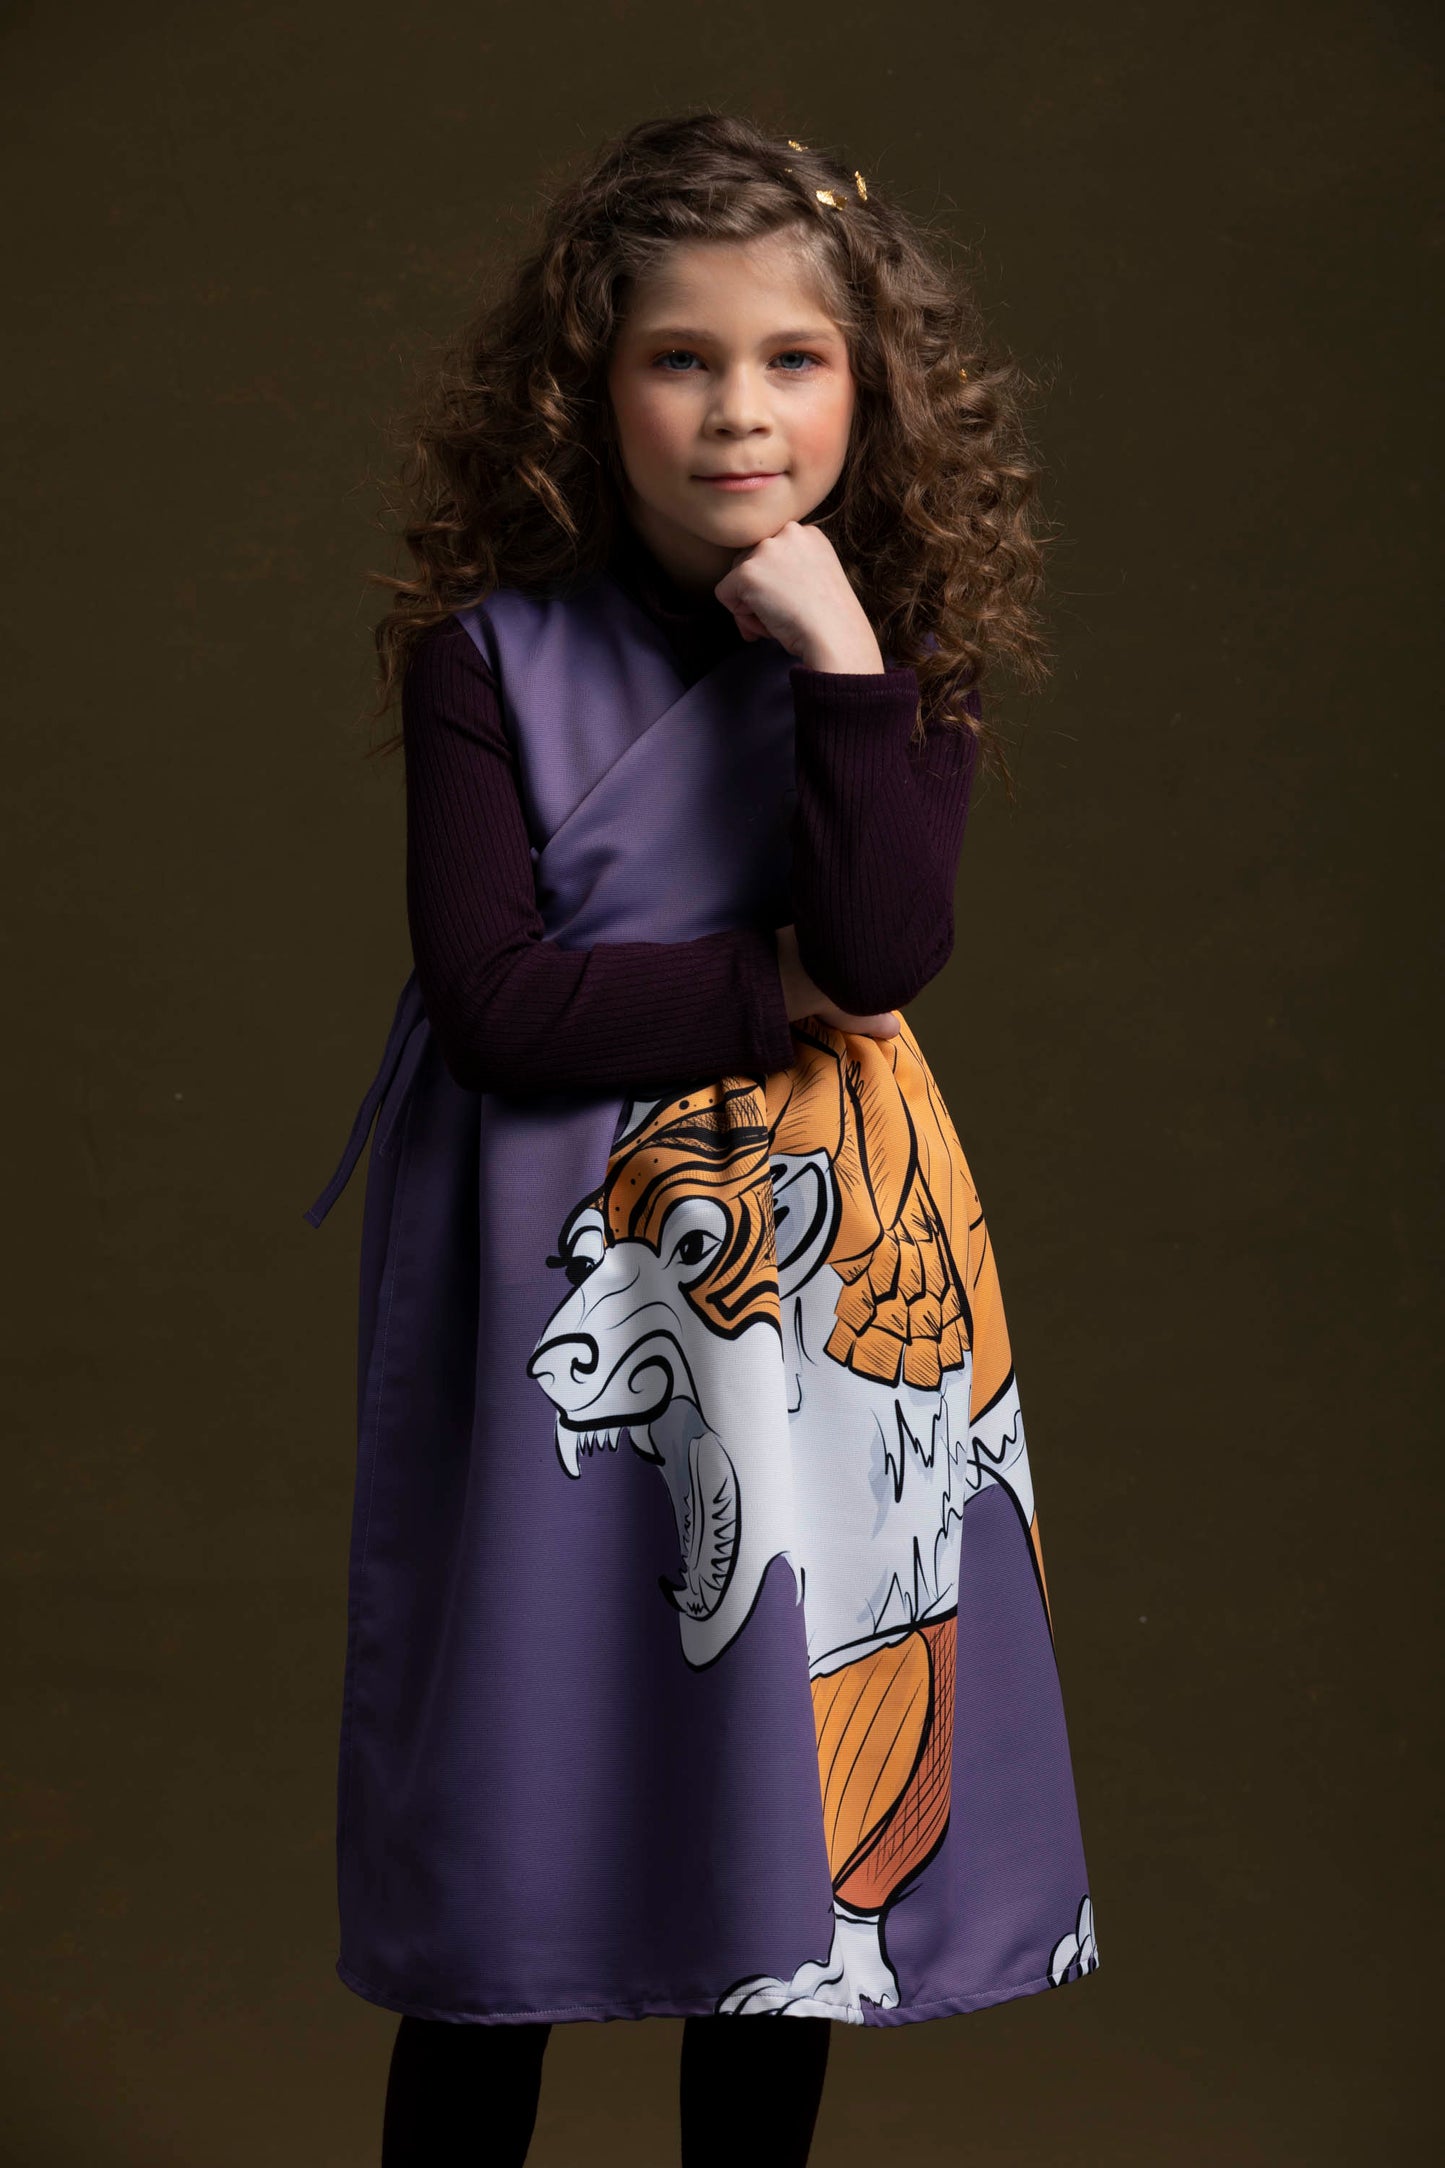 The young sweetheart poses like The Thinker in her purple knit tunic and lorek dress